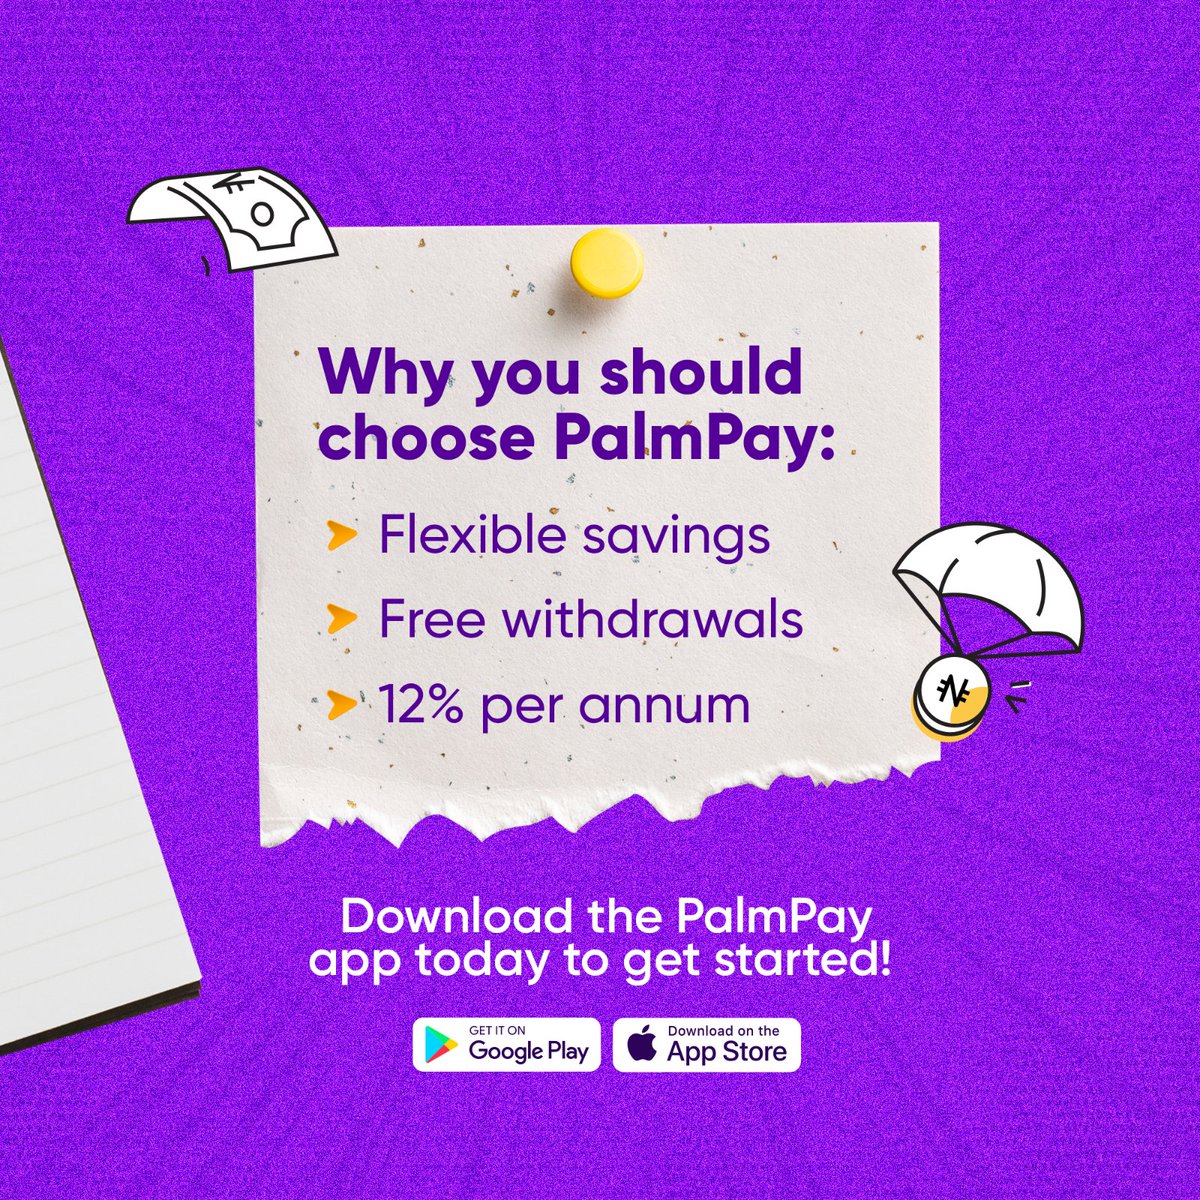 With PalmPay's Target Savings, you are in control of your goals. Set goals, and earn up to 12% interest per annum while at it. Download the app here: bit.ly/DownloadPalmPay #PalmPay